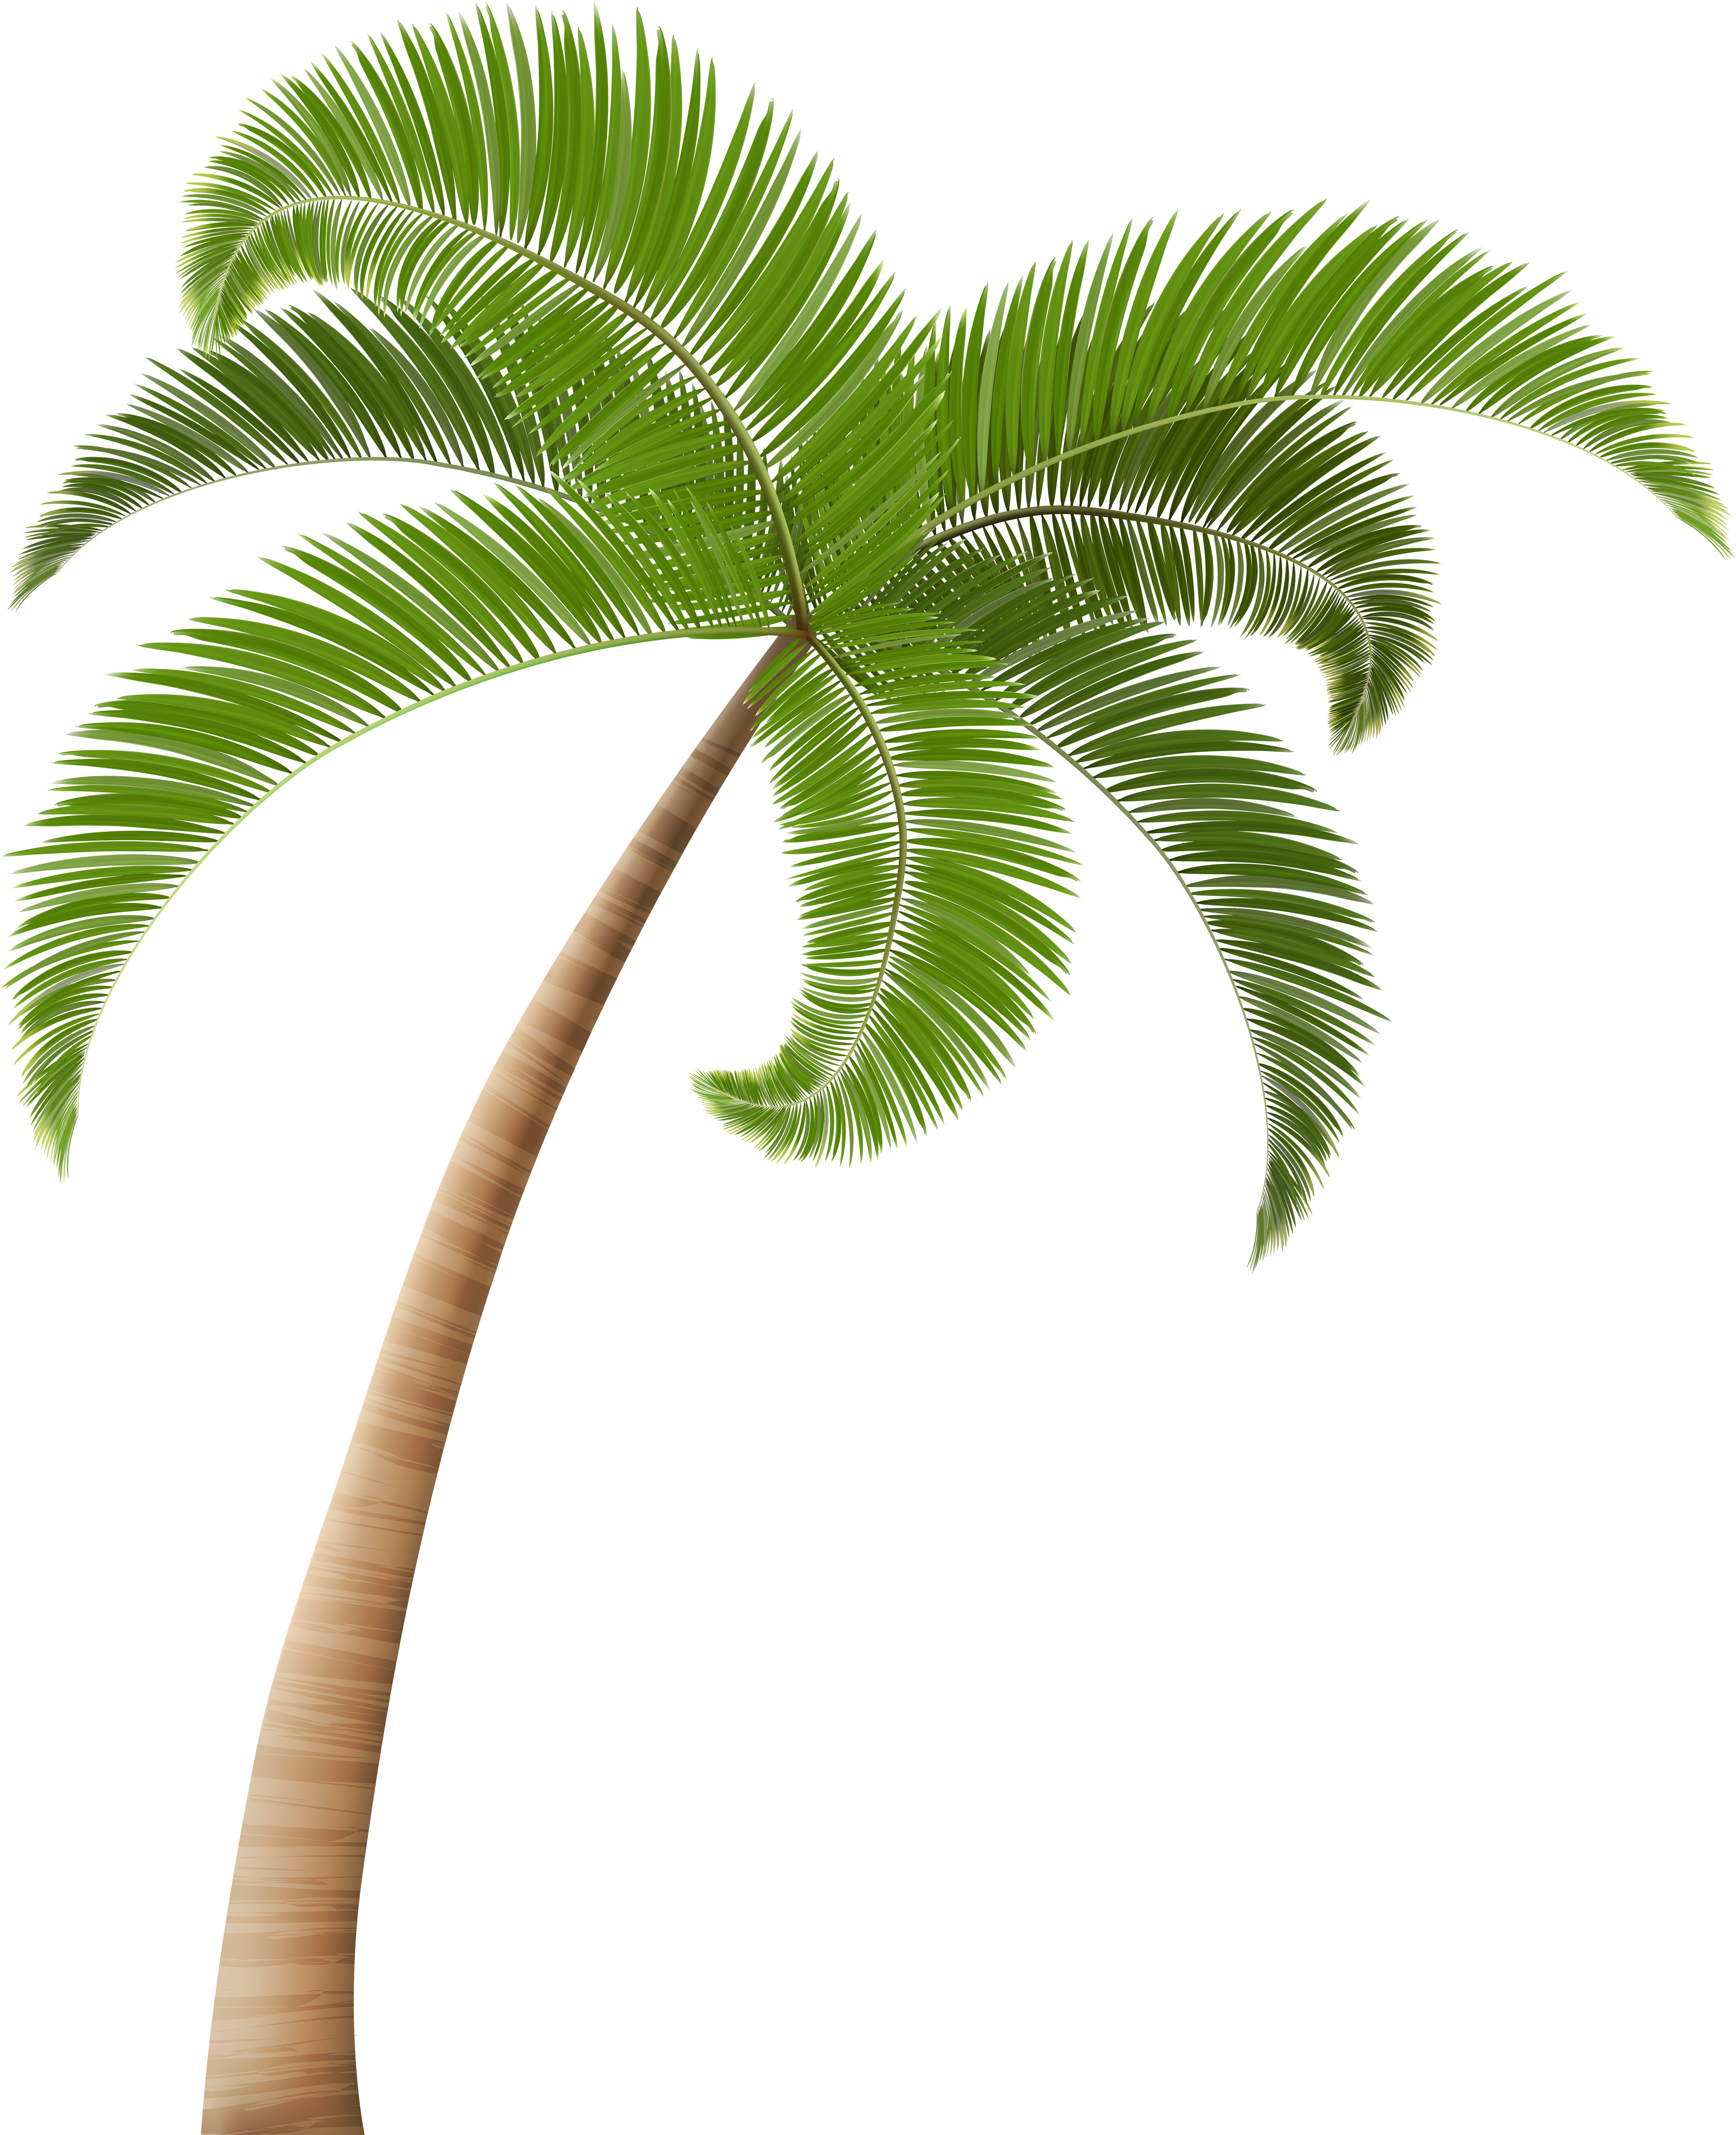 Coconut Tree Png Image Background Source - Coconut Tree Clipart Png (4176x5000)